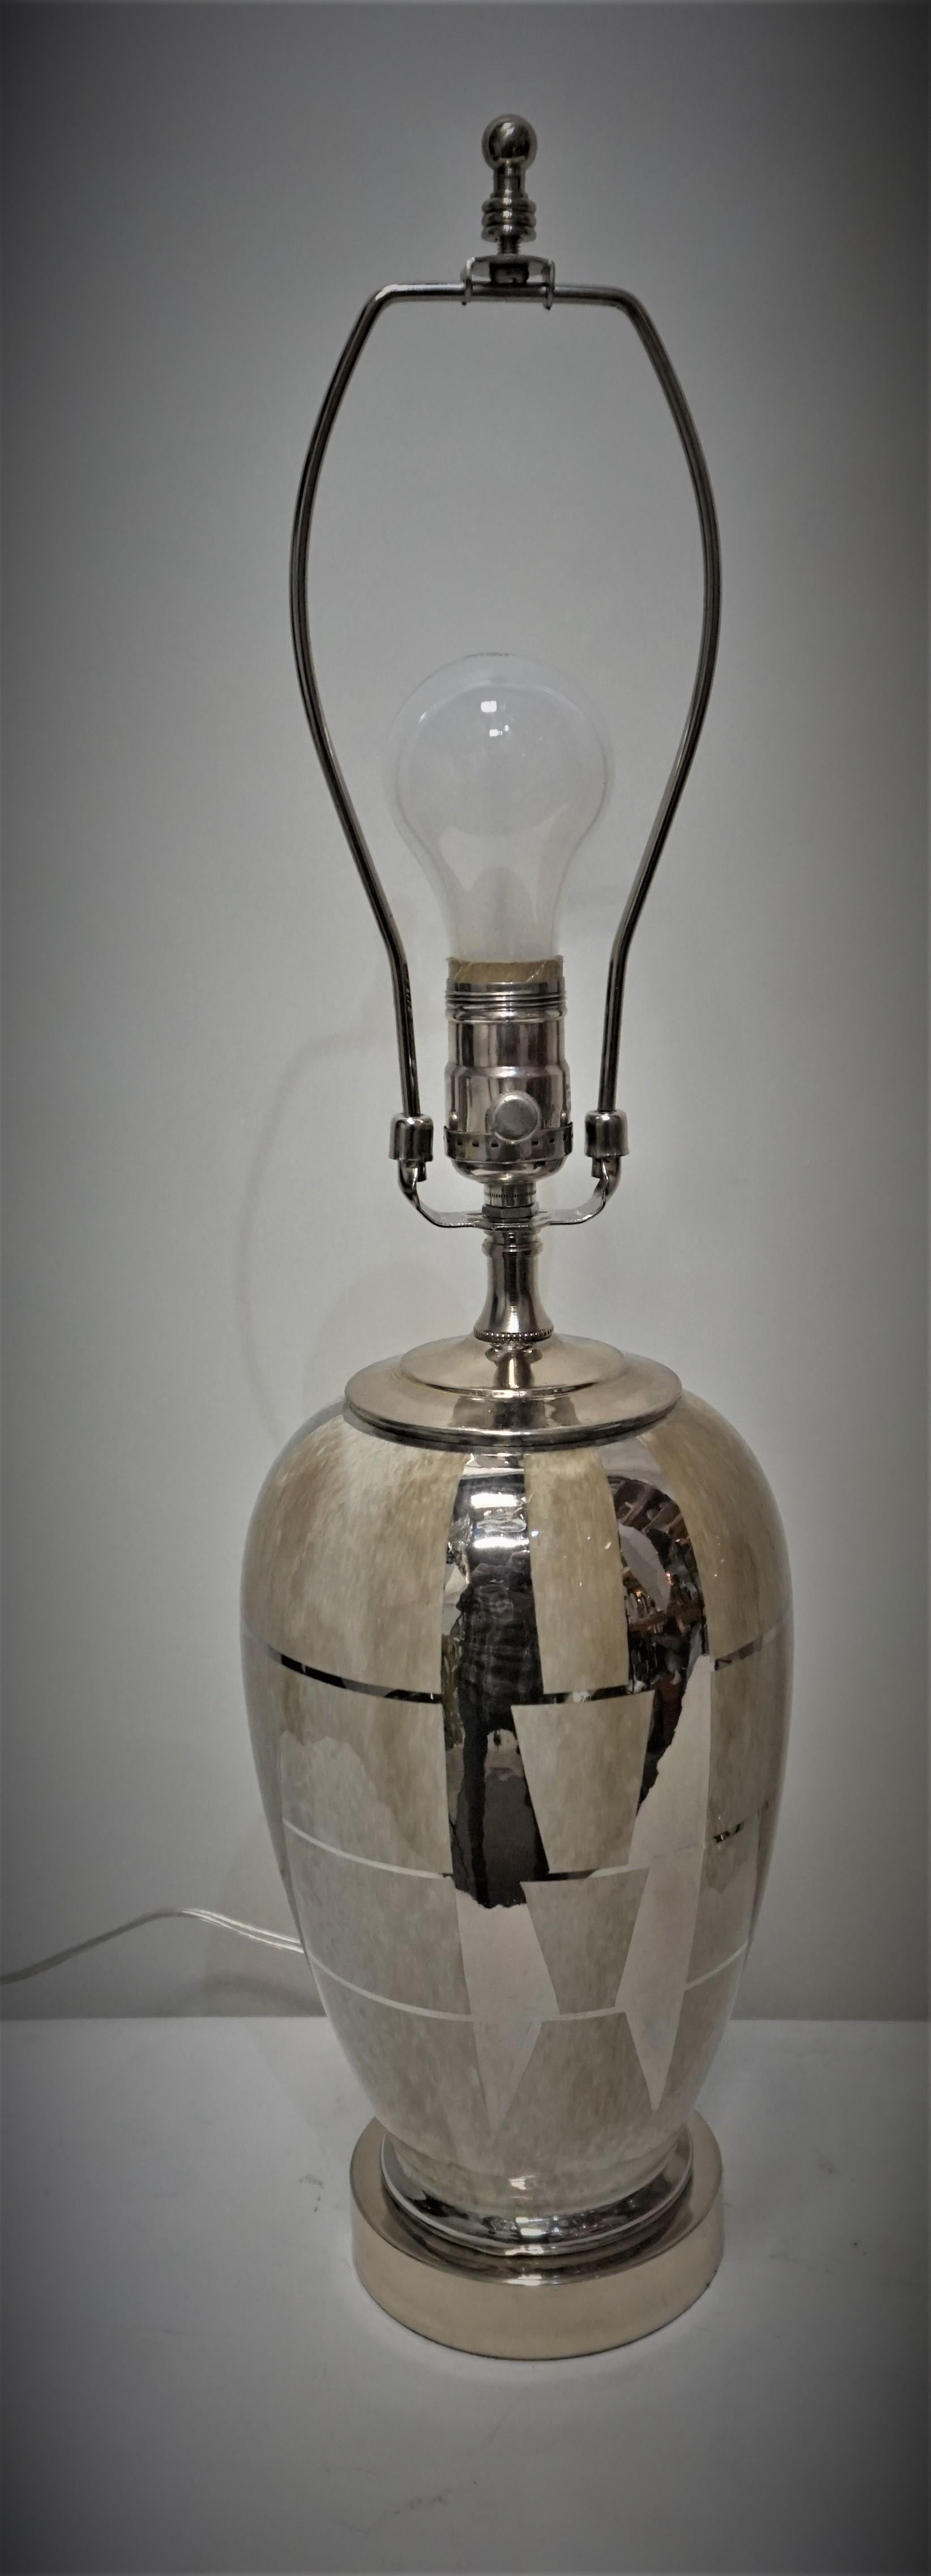 Pair of Art Deco Ceramic Silver and Beige Color Table Lamps For Sale 1